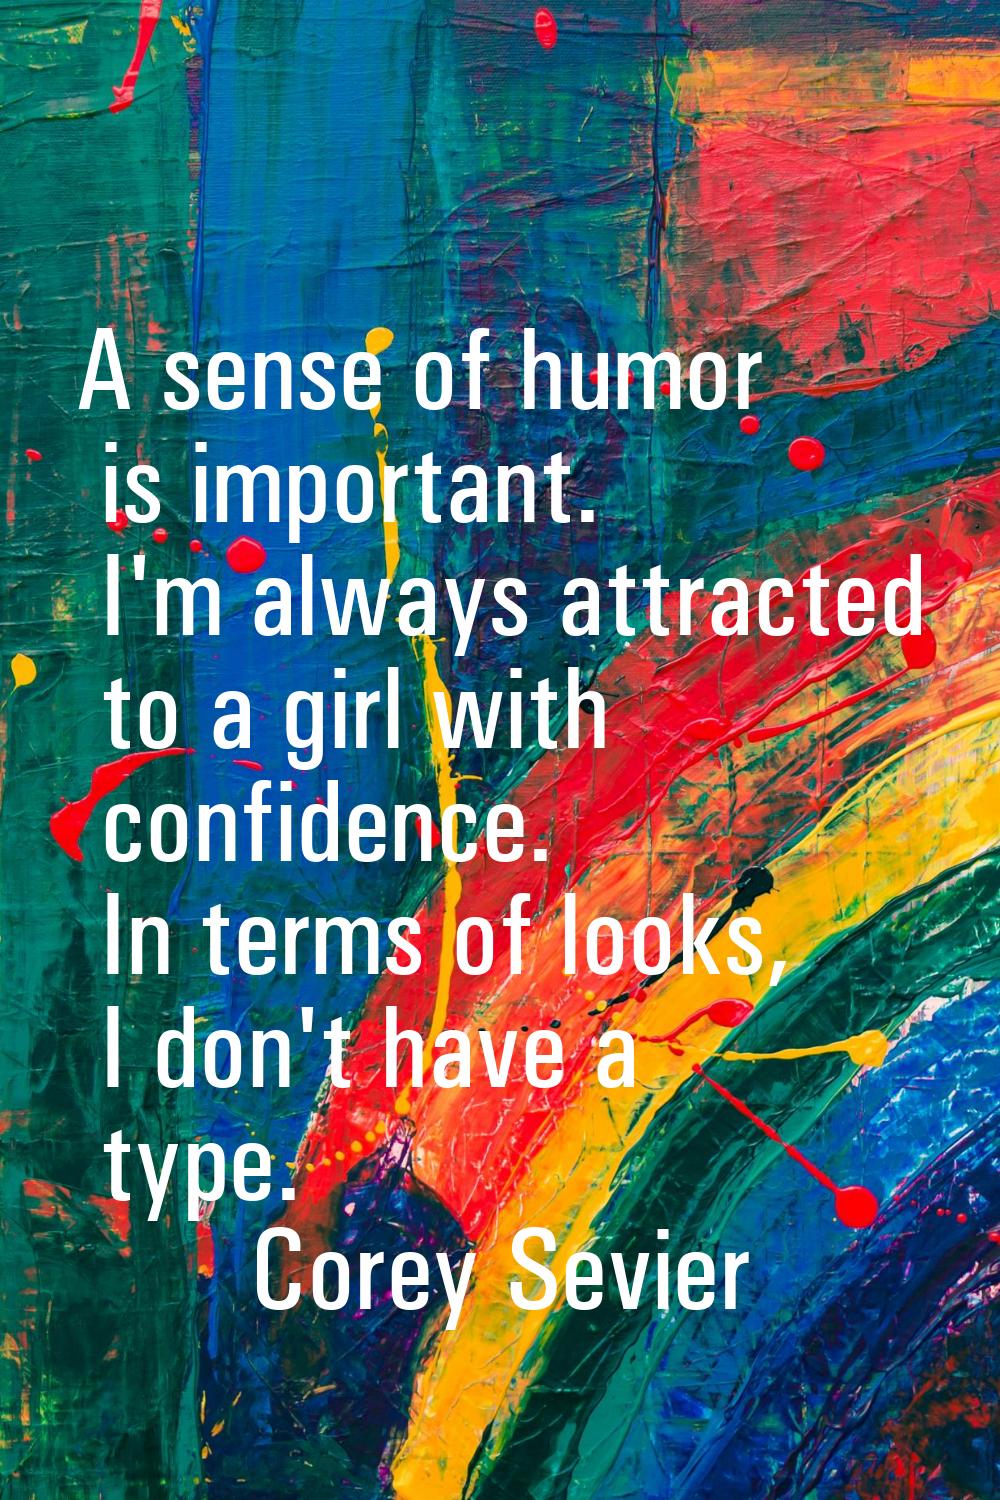 A sense of humor is important. I'm always attracted to a girl with confidence. In terms of looks, I